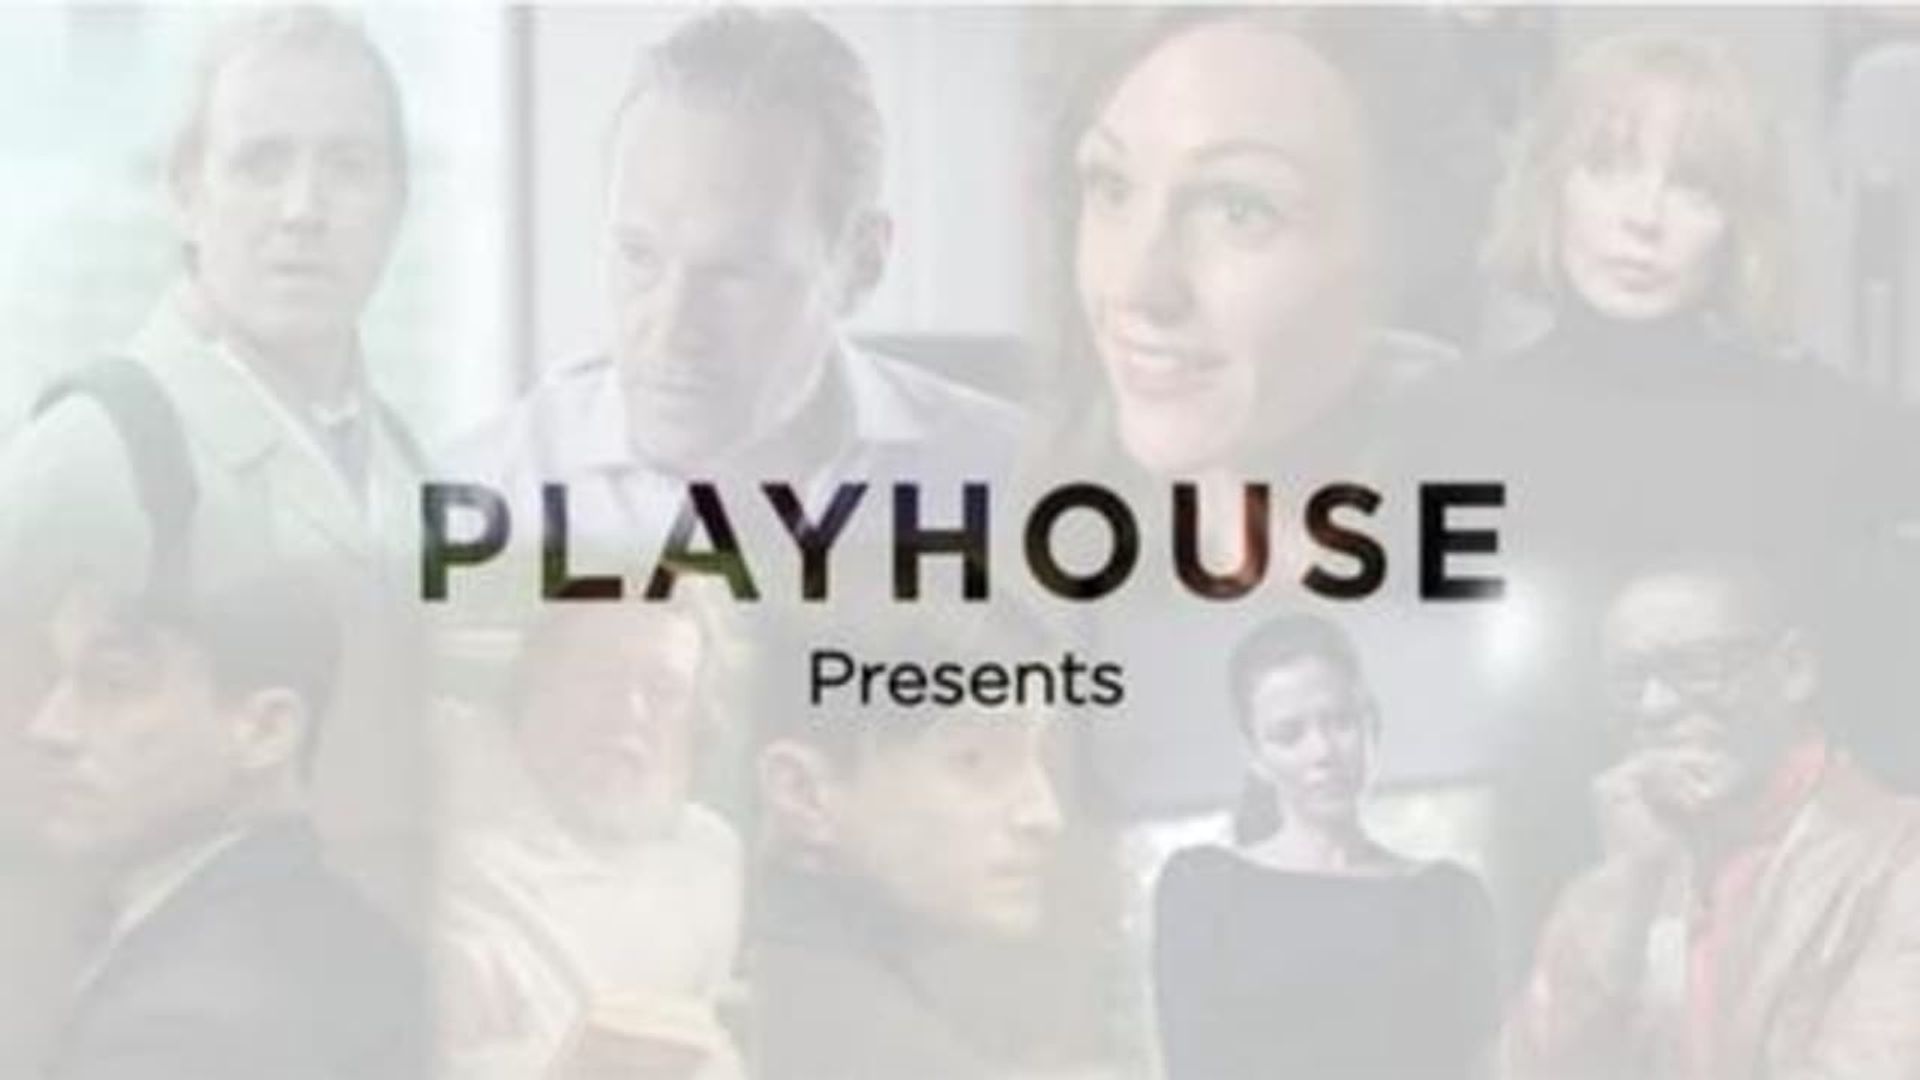 Playhouse Presents background